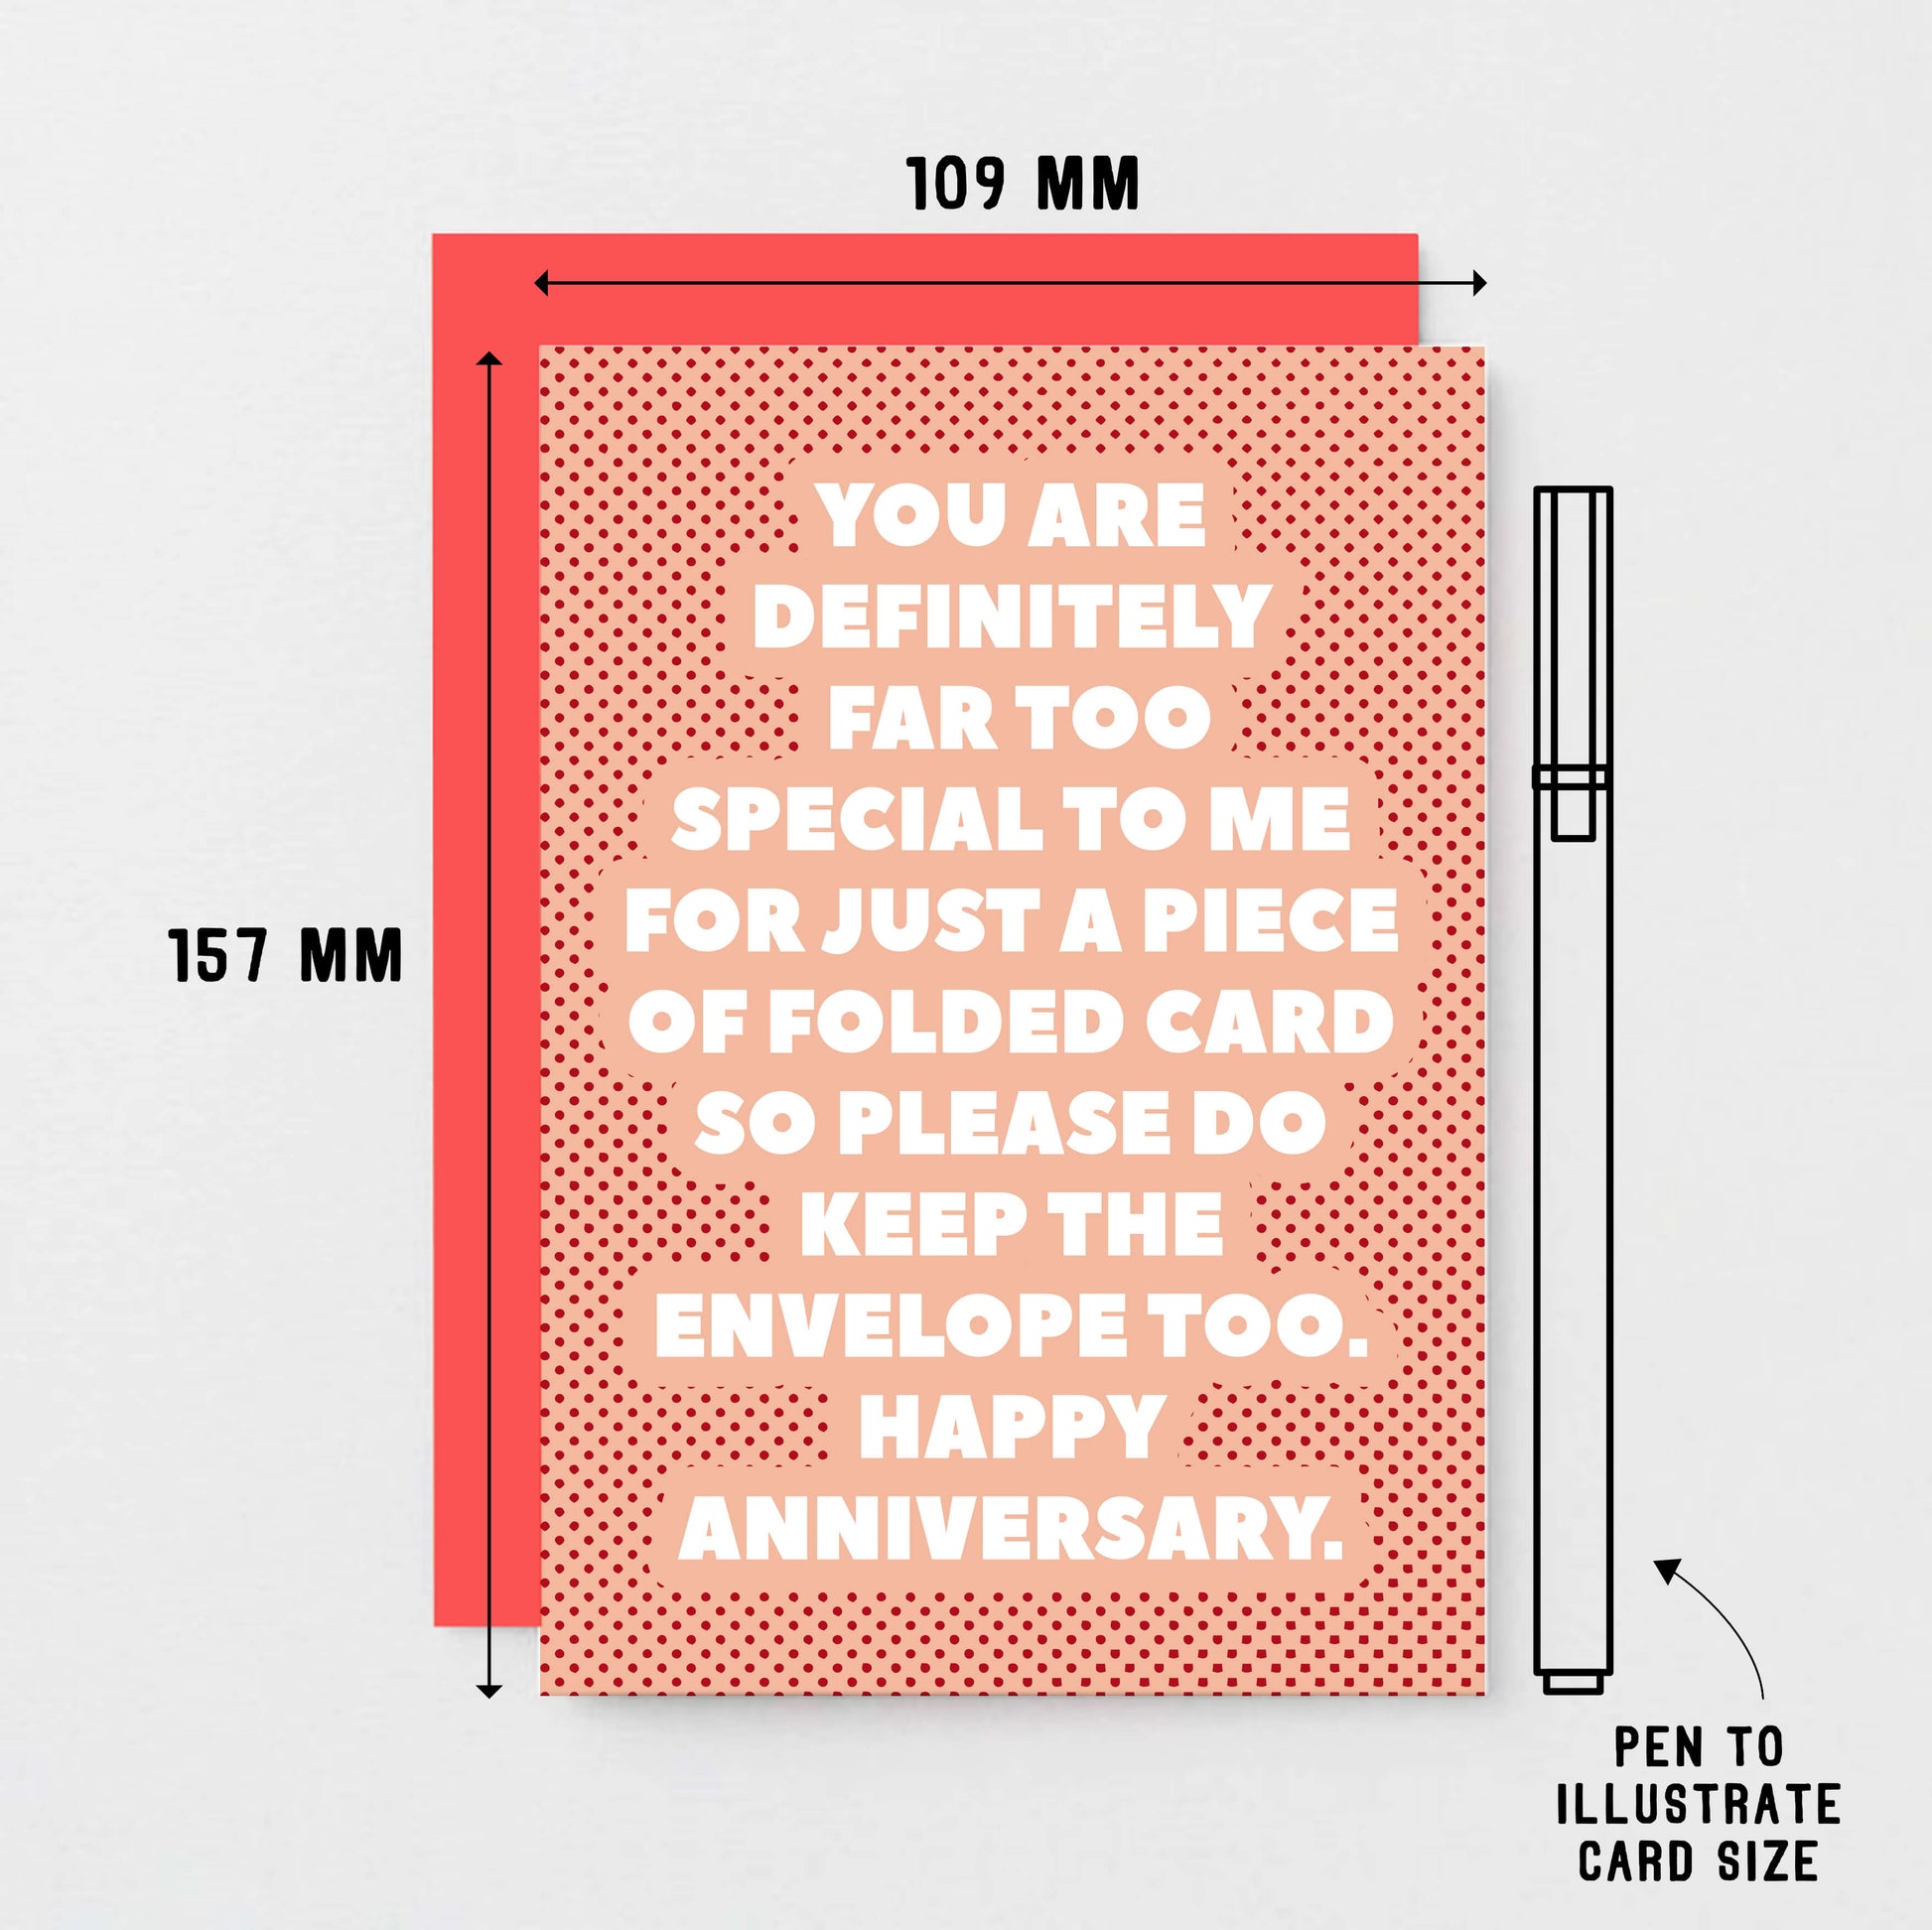 Anniversary Card by SixElevenCreations. Reads You are definitely far too special to me for just a piece of folded card so please do keep the envelope too. Happy Anniversary. Product Code SE2709A6